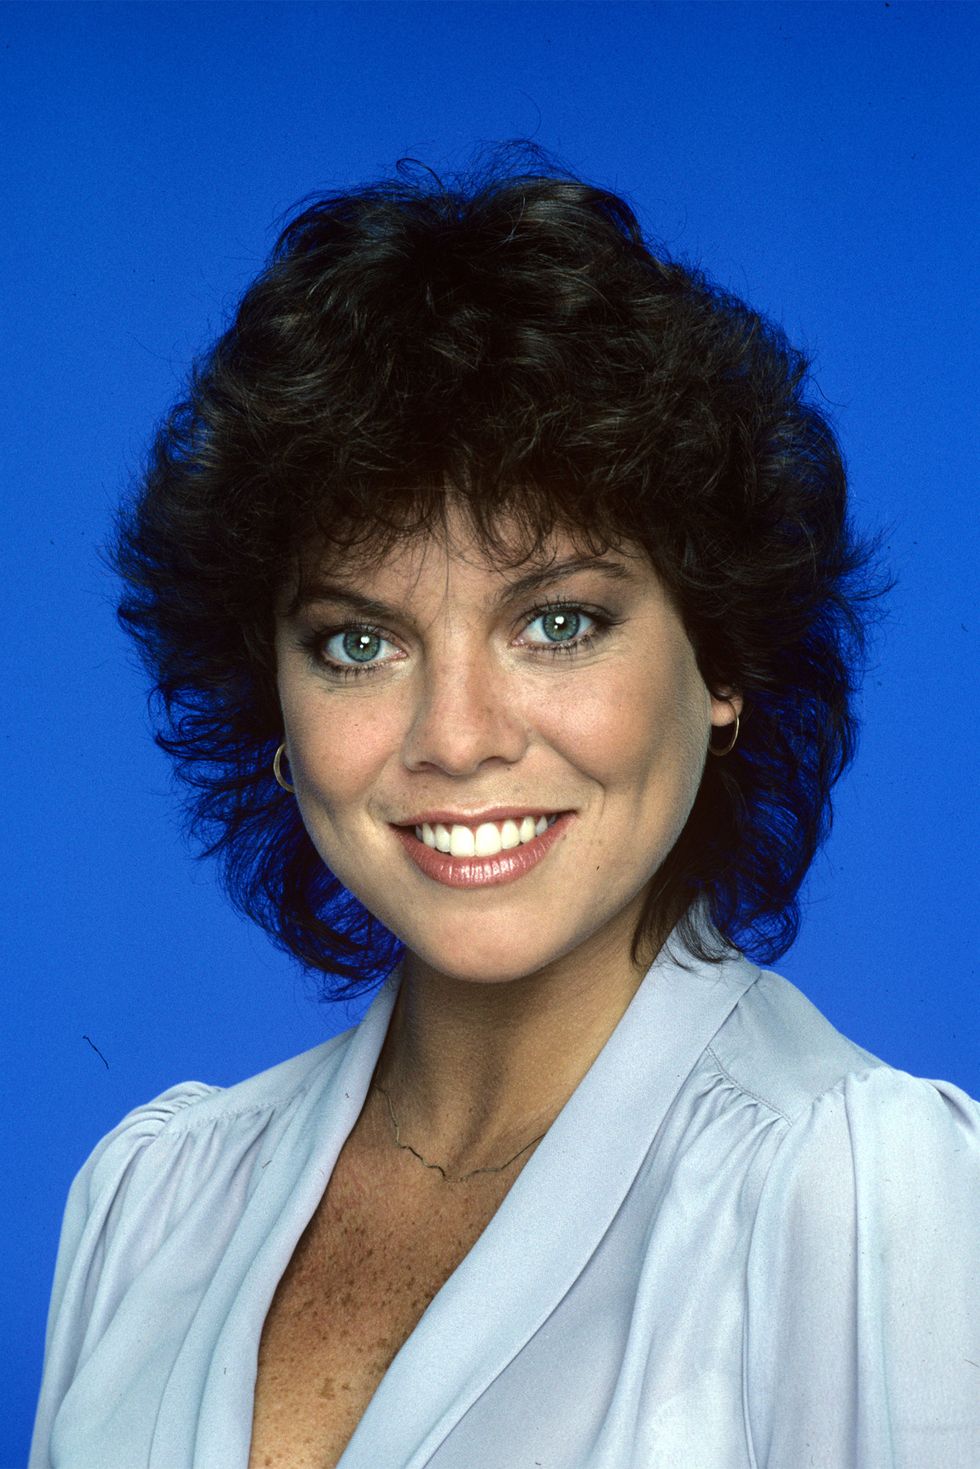 Erin Moran Porn Britney Spears - Celebrity Deaths in 2017 - Mary Tyler Moore, Gregg Allman, Troy Gentry and  More Stars Who Died In 2017